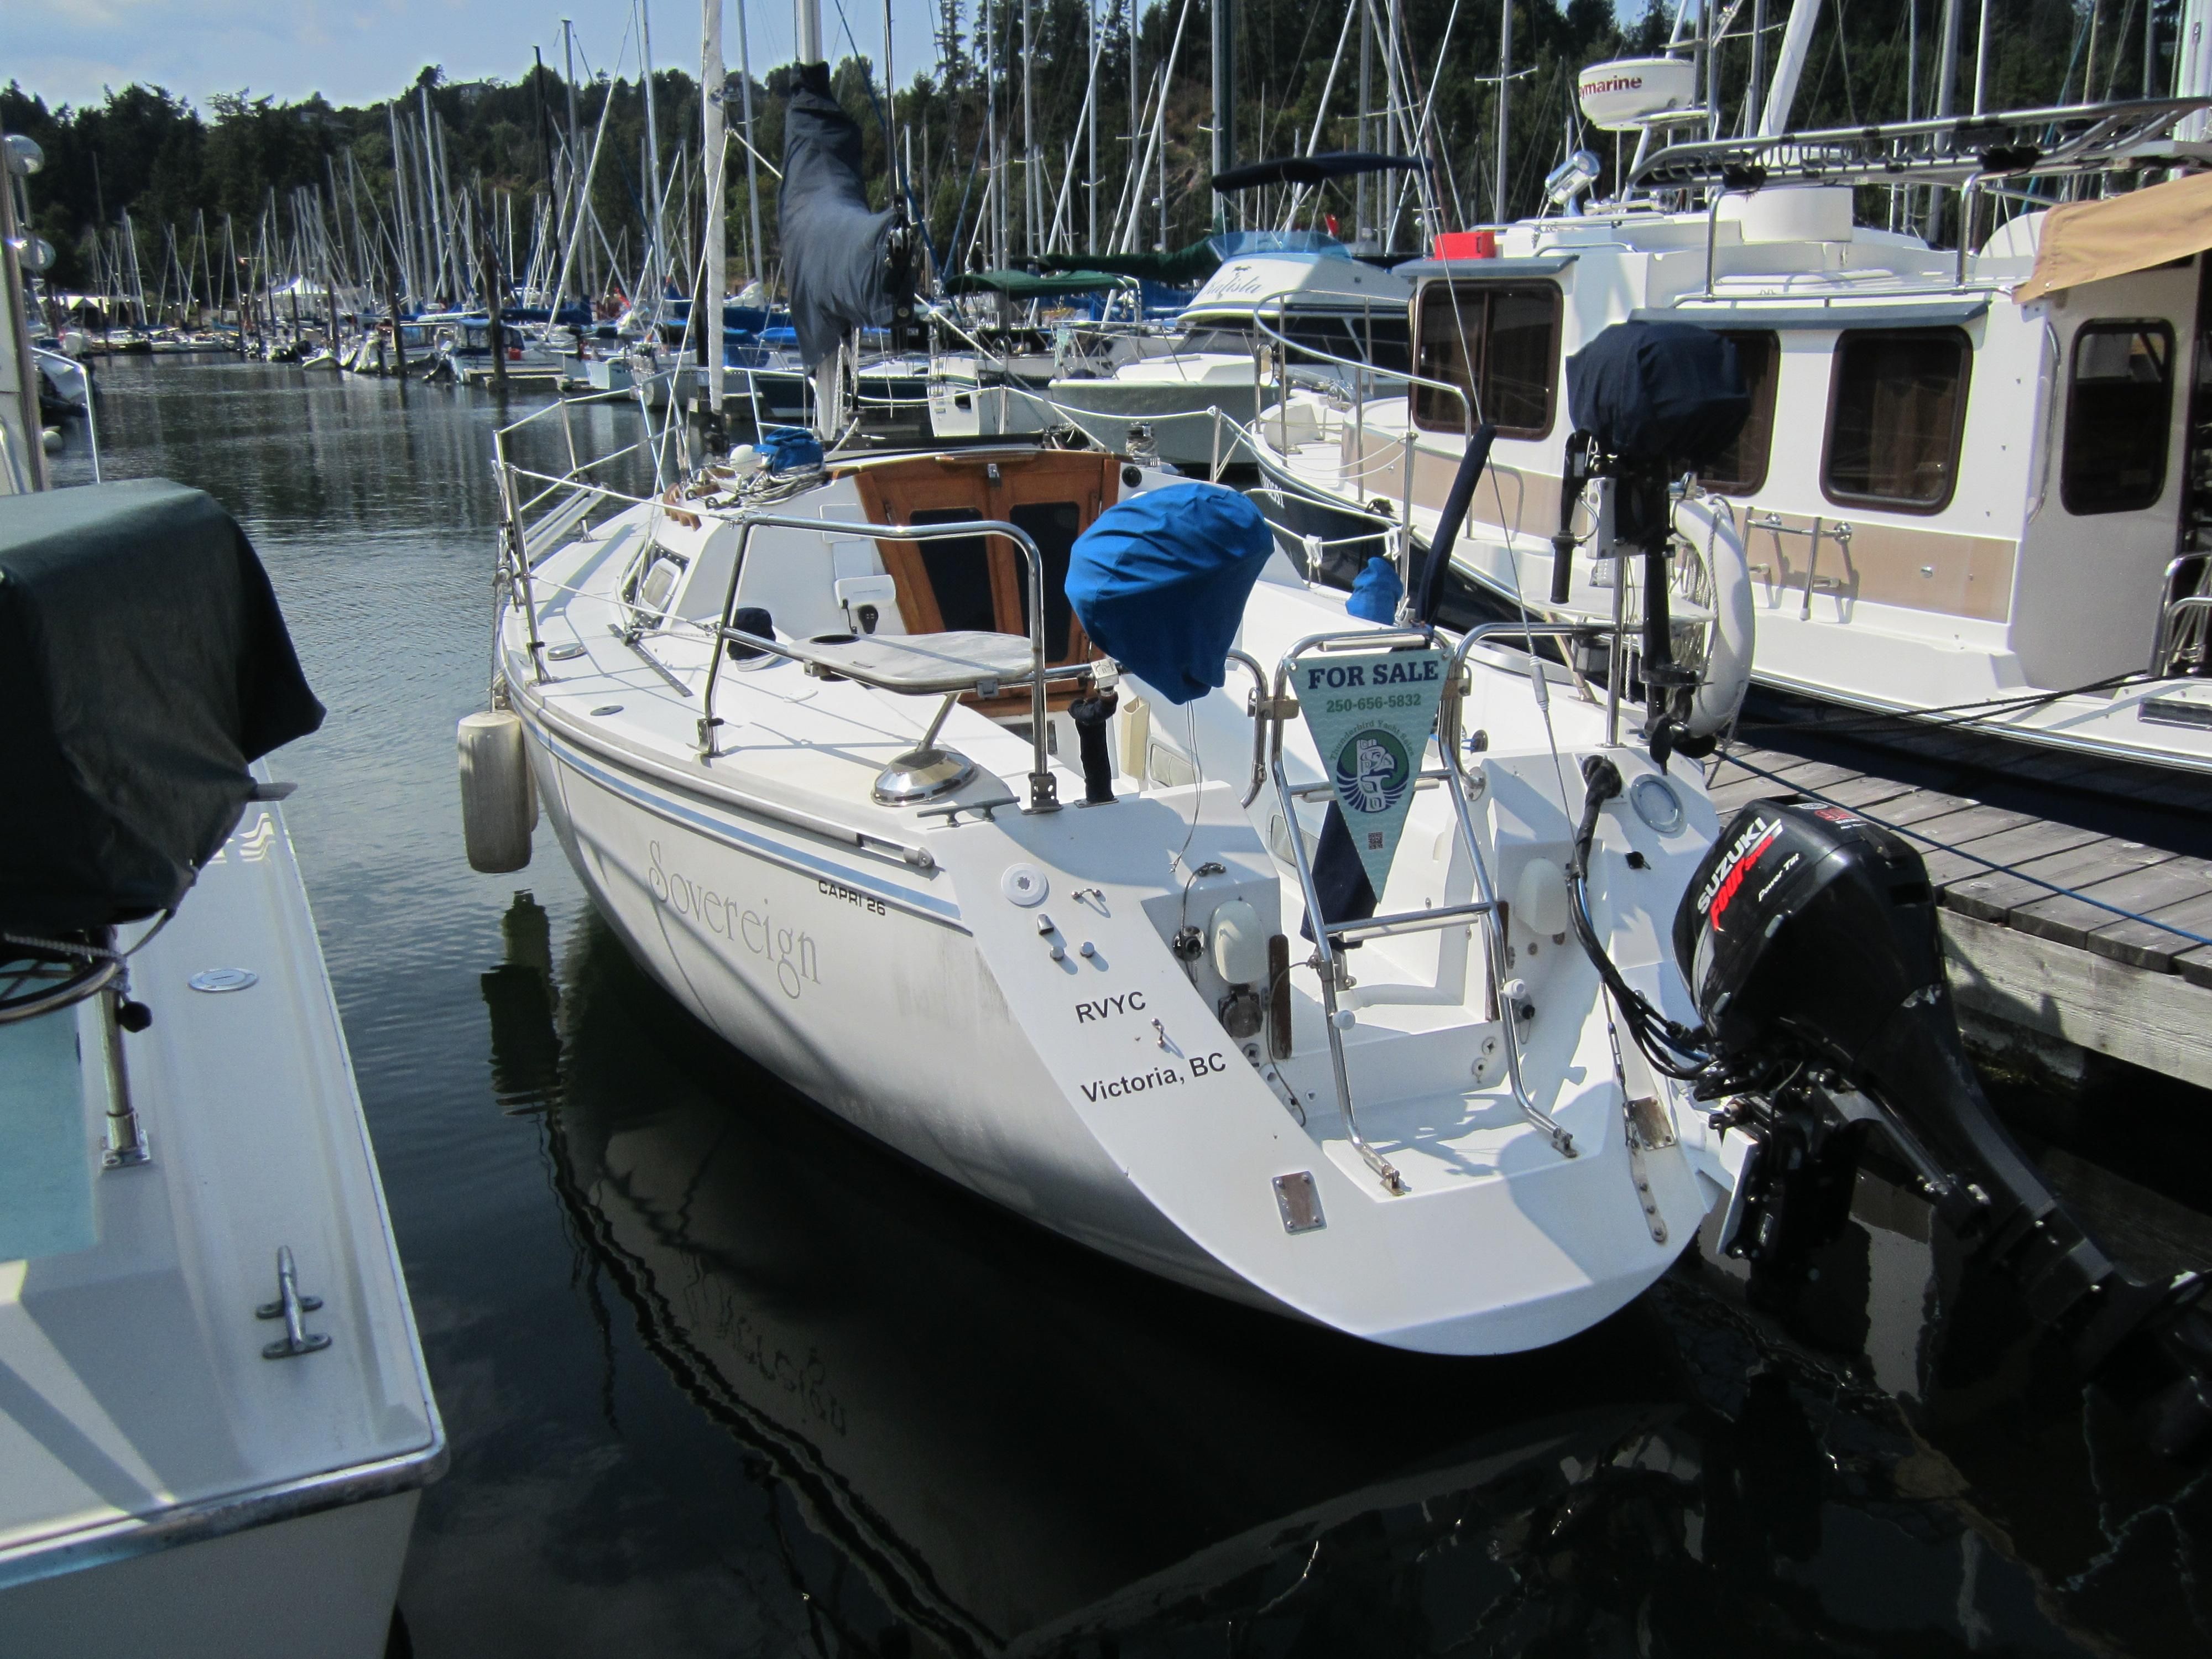 26 ft sailboat for sale